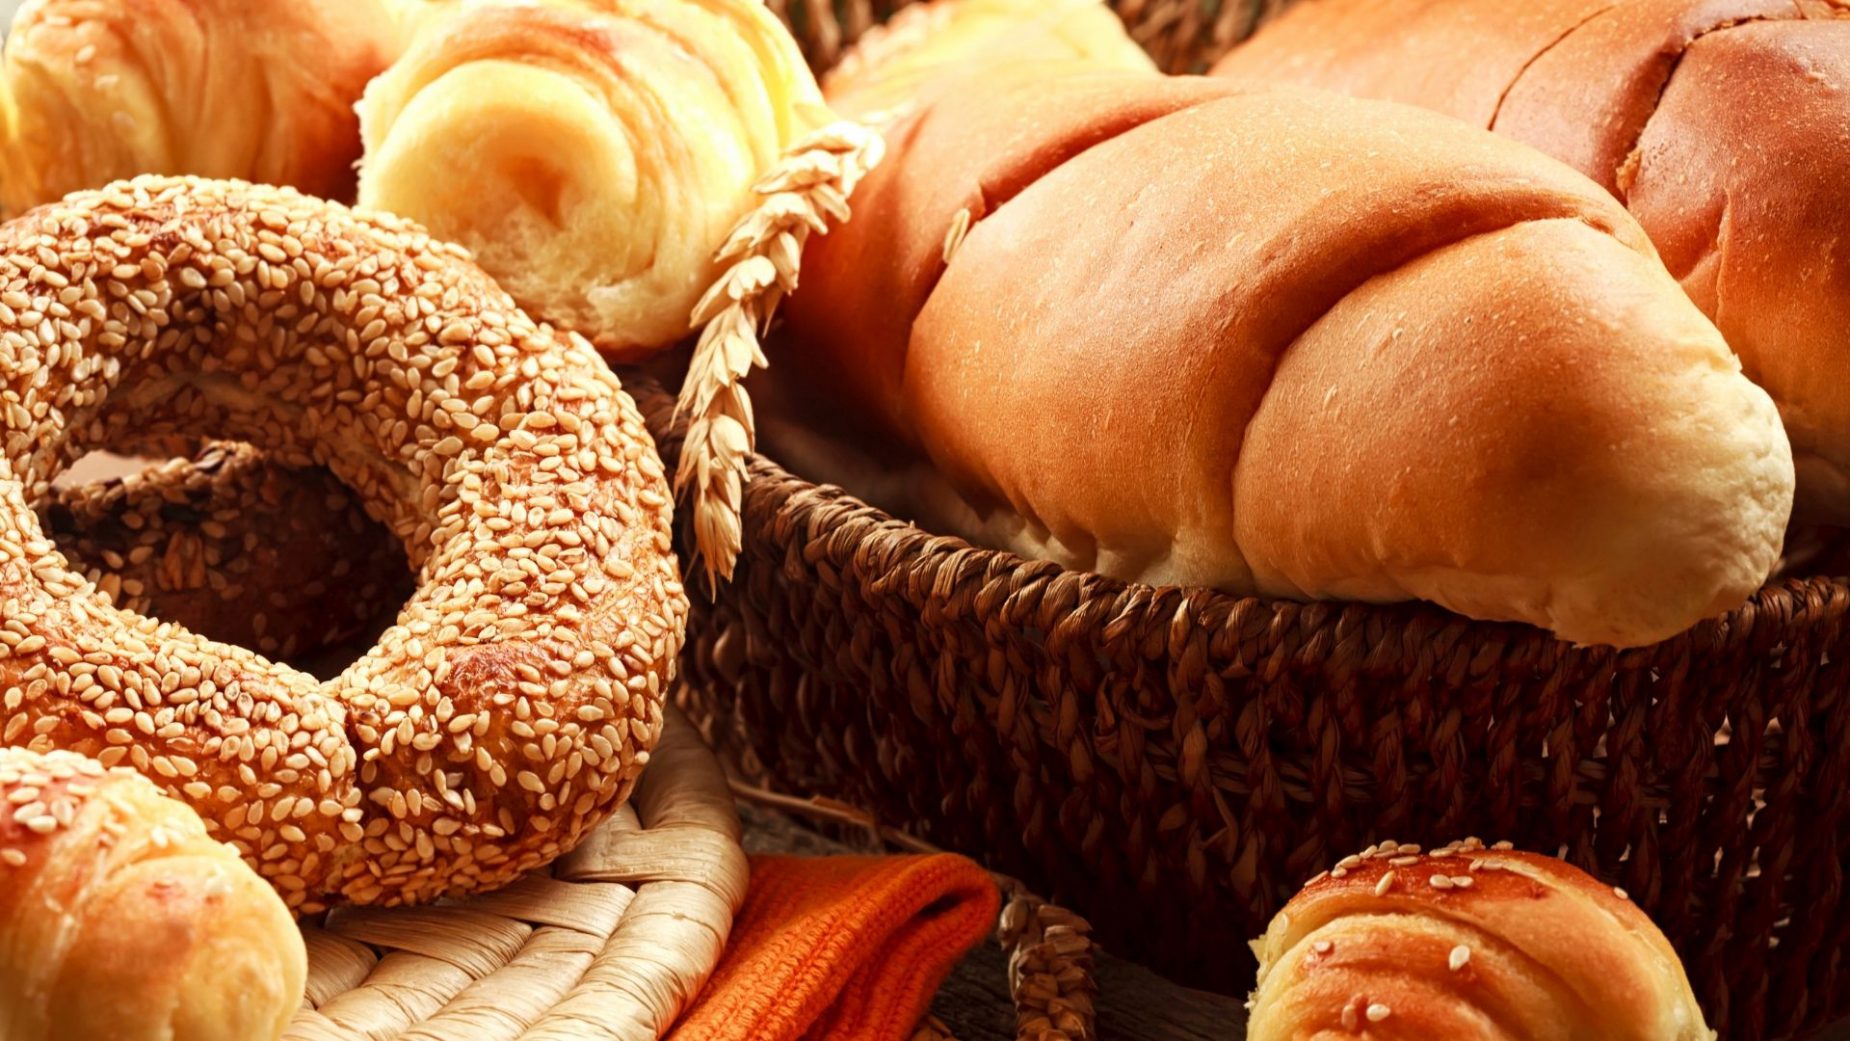 Bread And Bakery Products Market